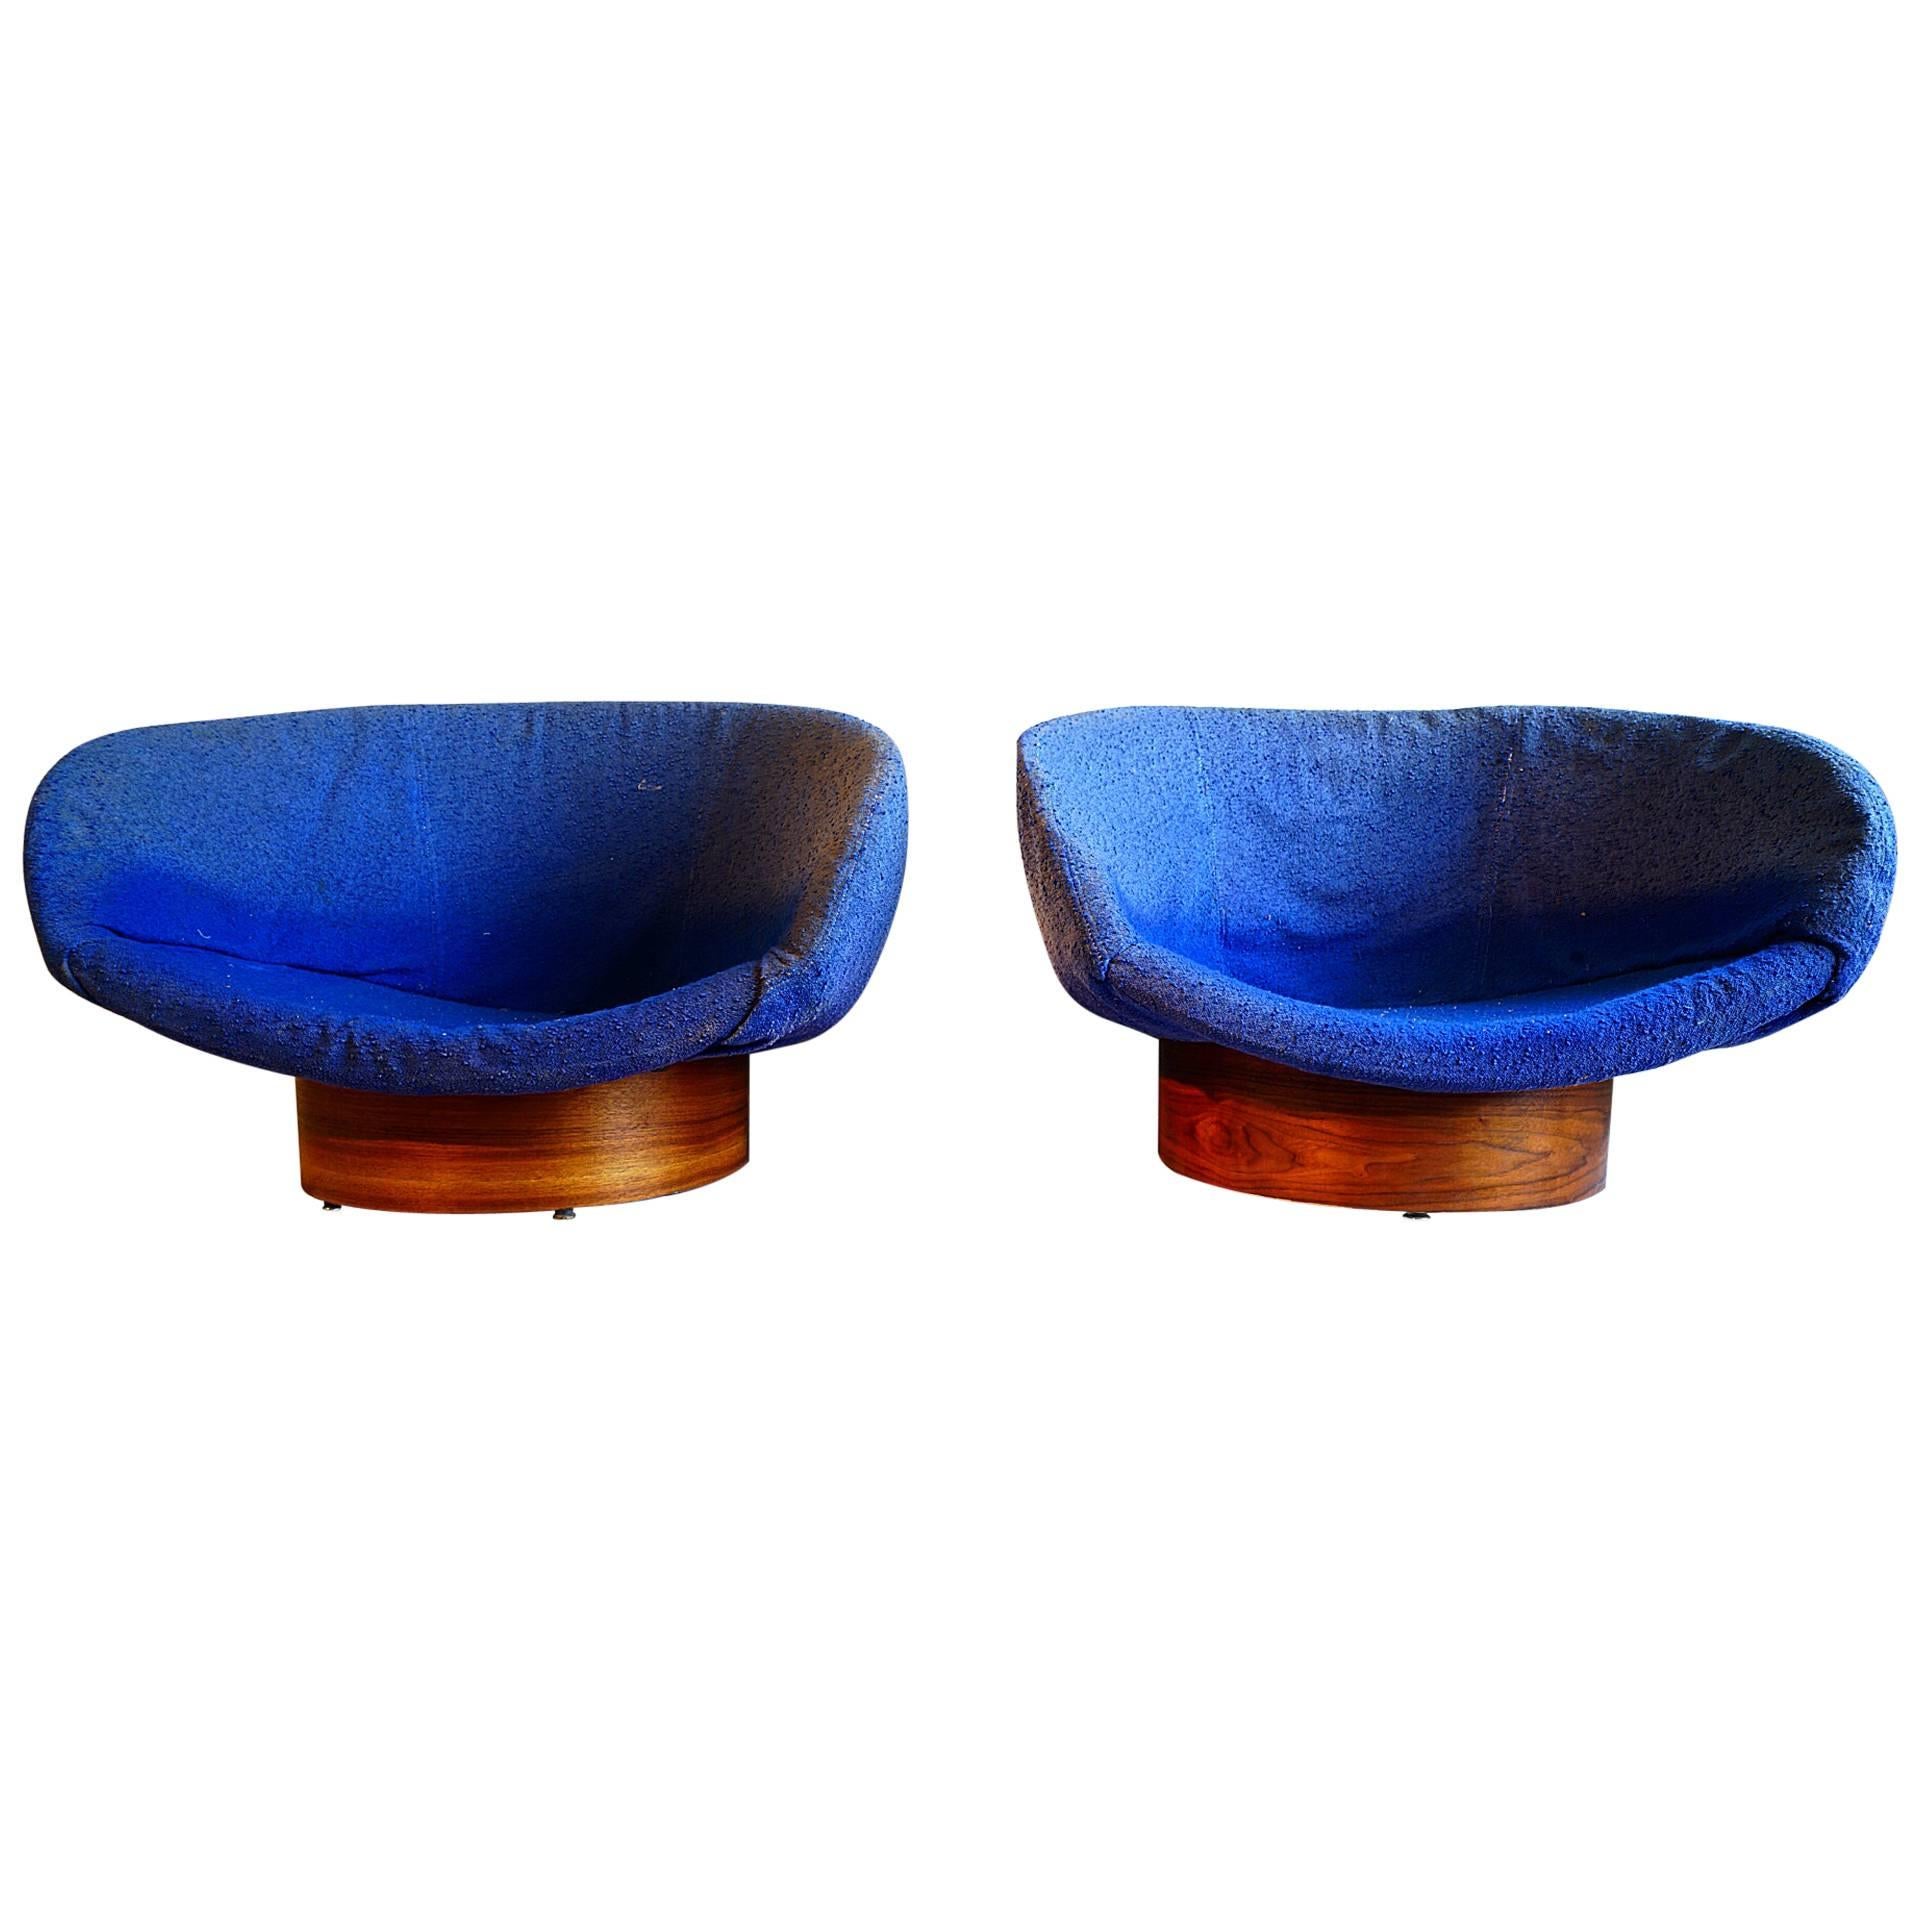 Extremely Rare Tub Chairs in the style of Adrian Pearsall circa 1960s For Sale